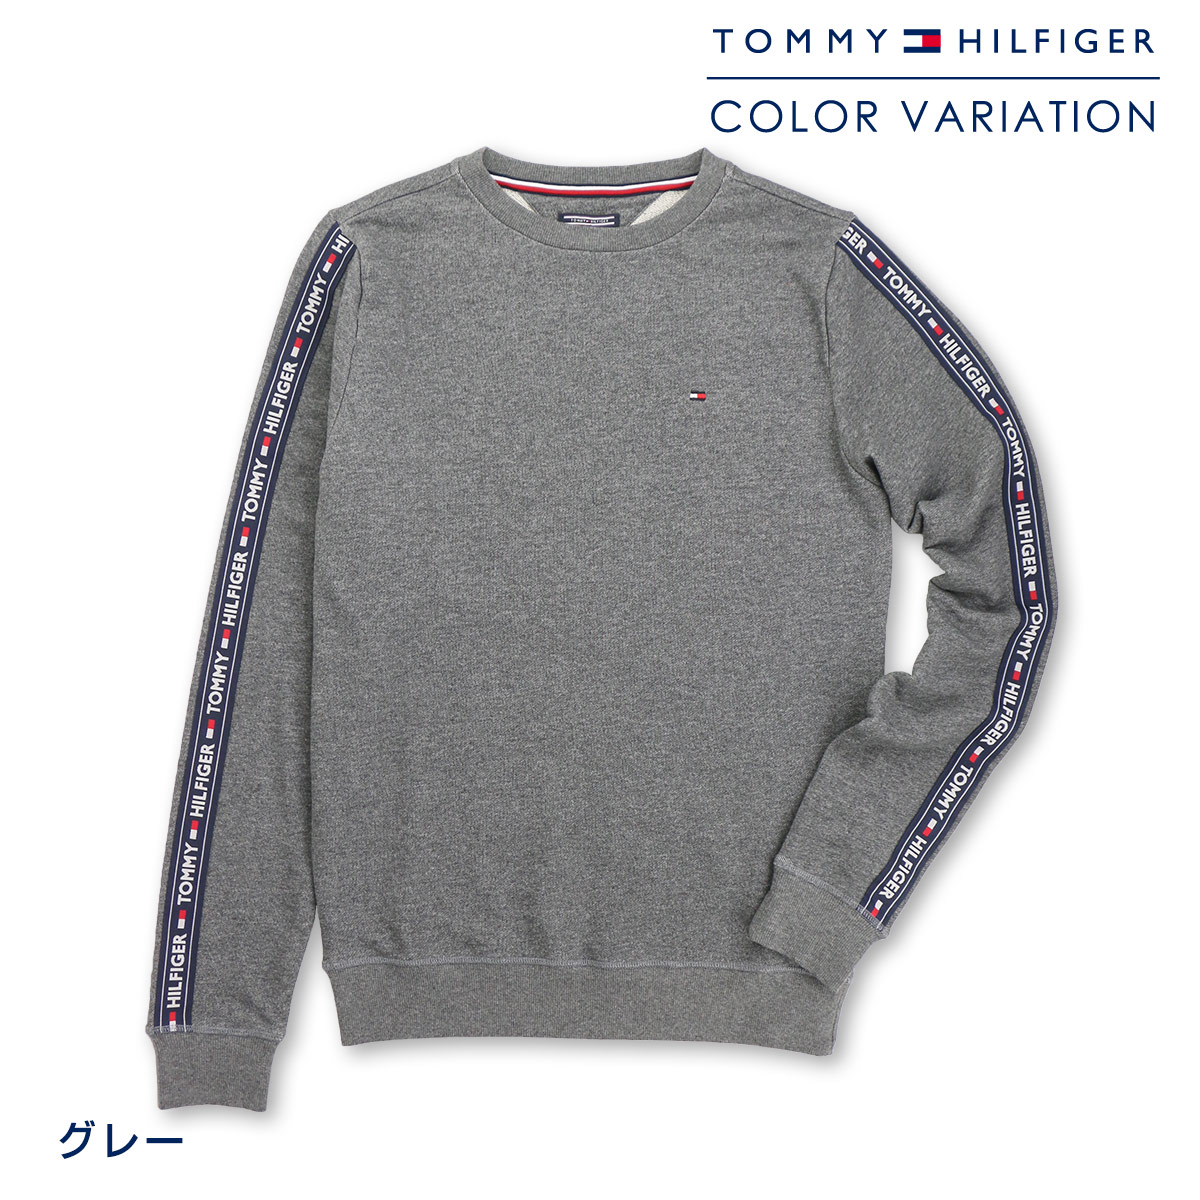 tommy hilfiger th1445s